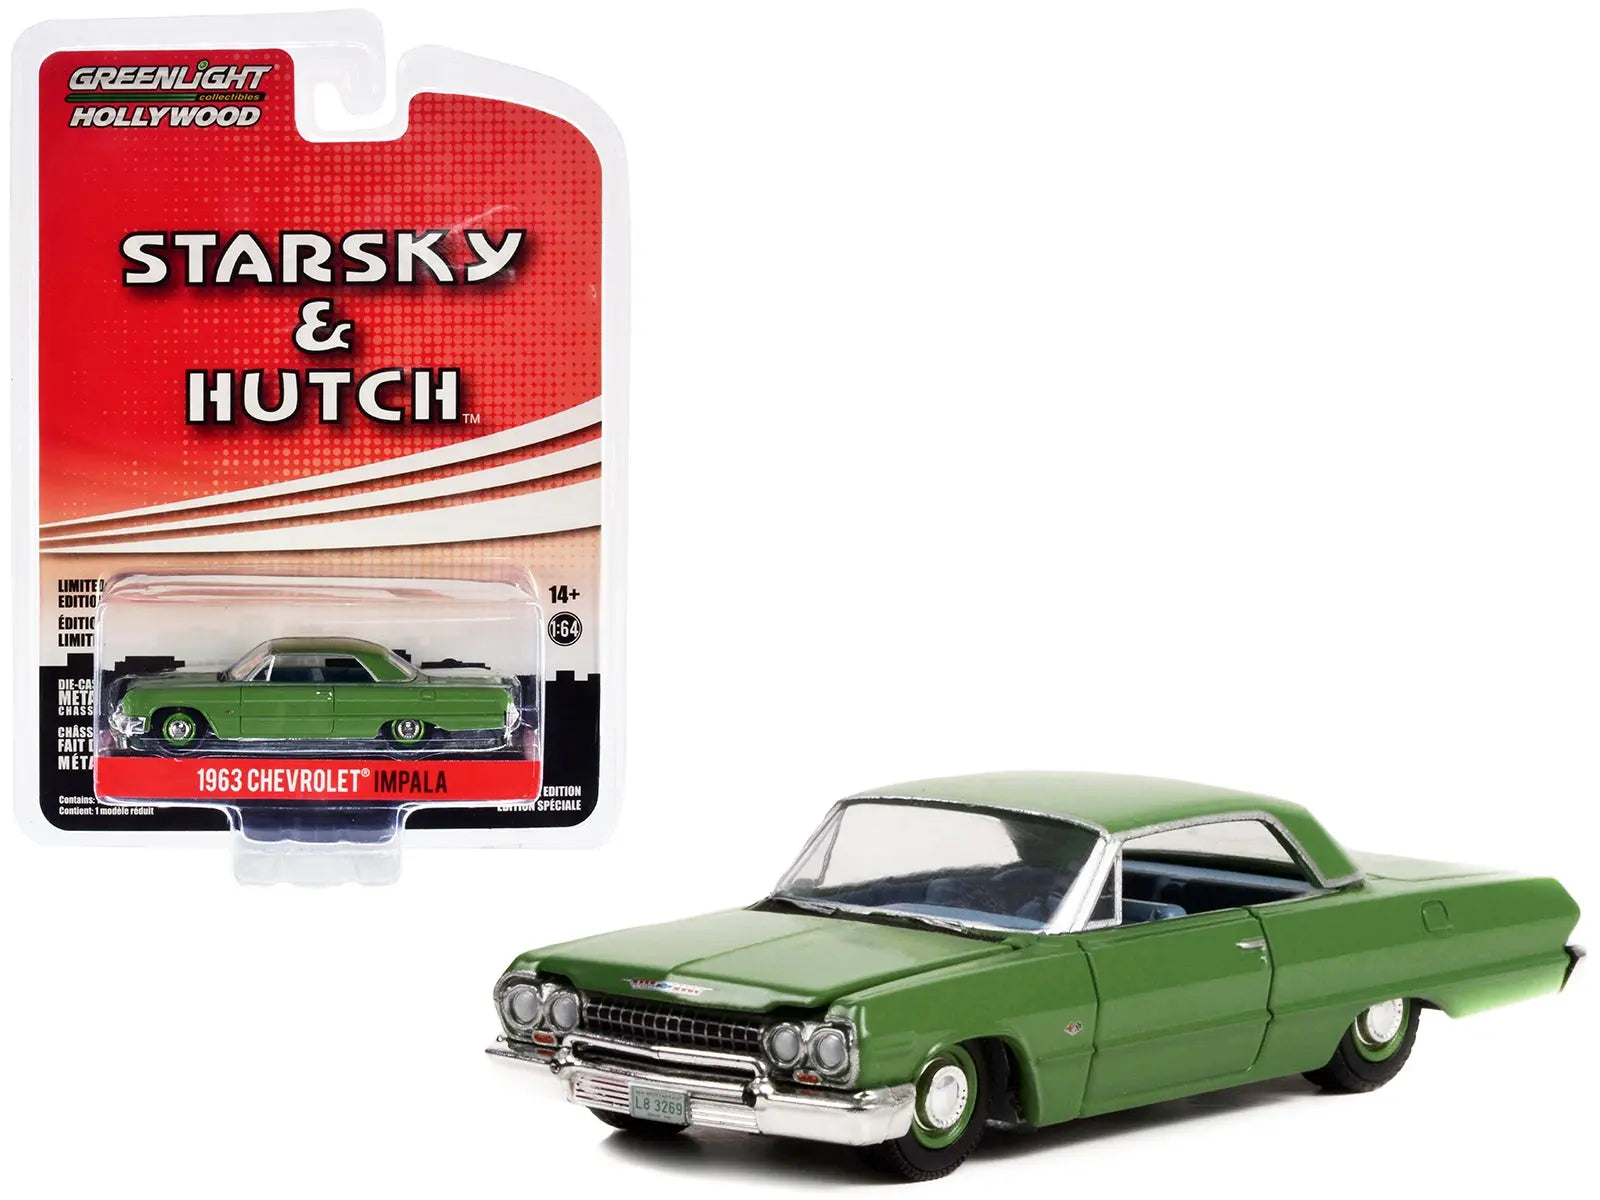 1963 Chevrolet Impala Green with Blue Interior "Starsky and Hutch" (1975-1979) TV Series Hollywood Special Edition Series 2 1/64 Diecast Model Car by Greenlight Greenlight